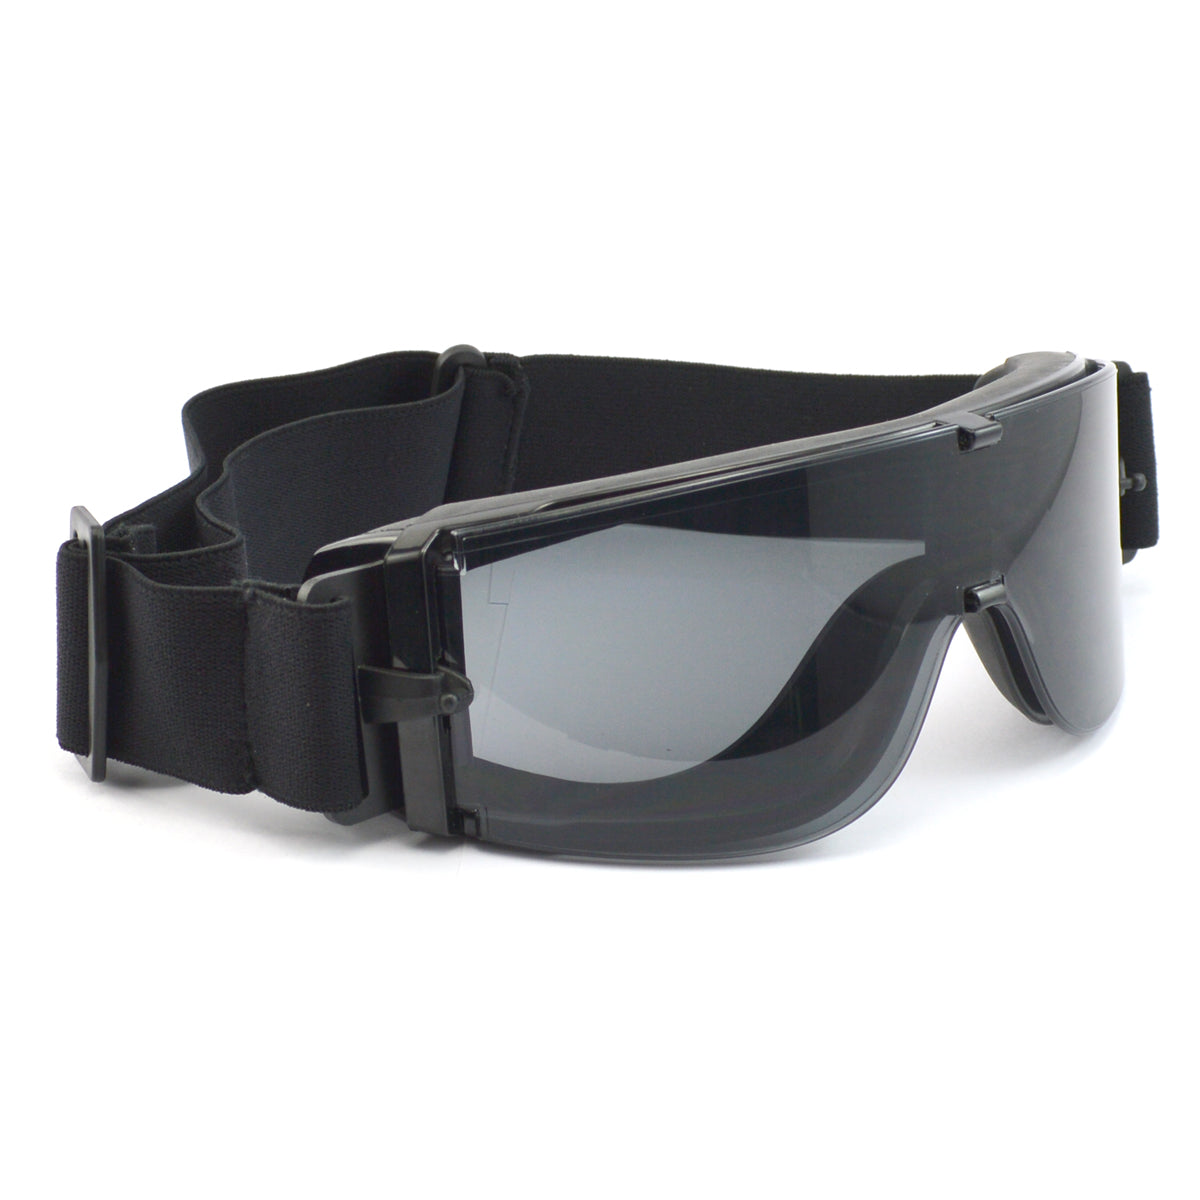 Unisex Semi-Goggle Style with Interchangeable Color Lense Cycling Sunglasses